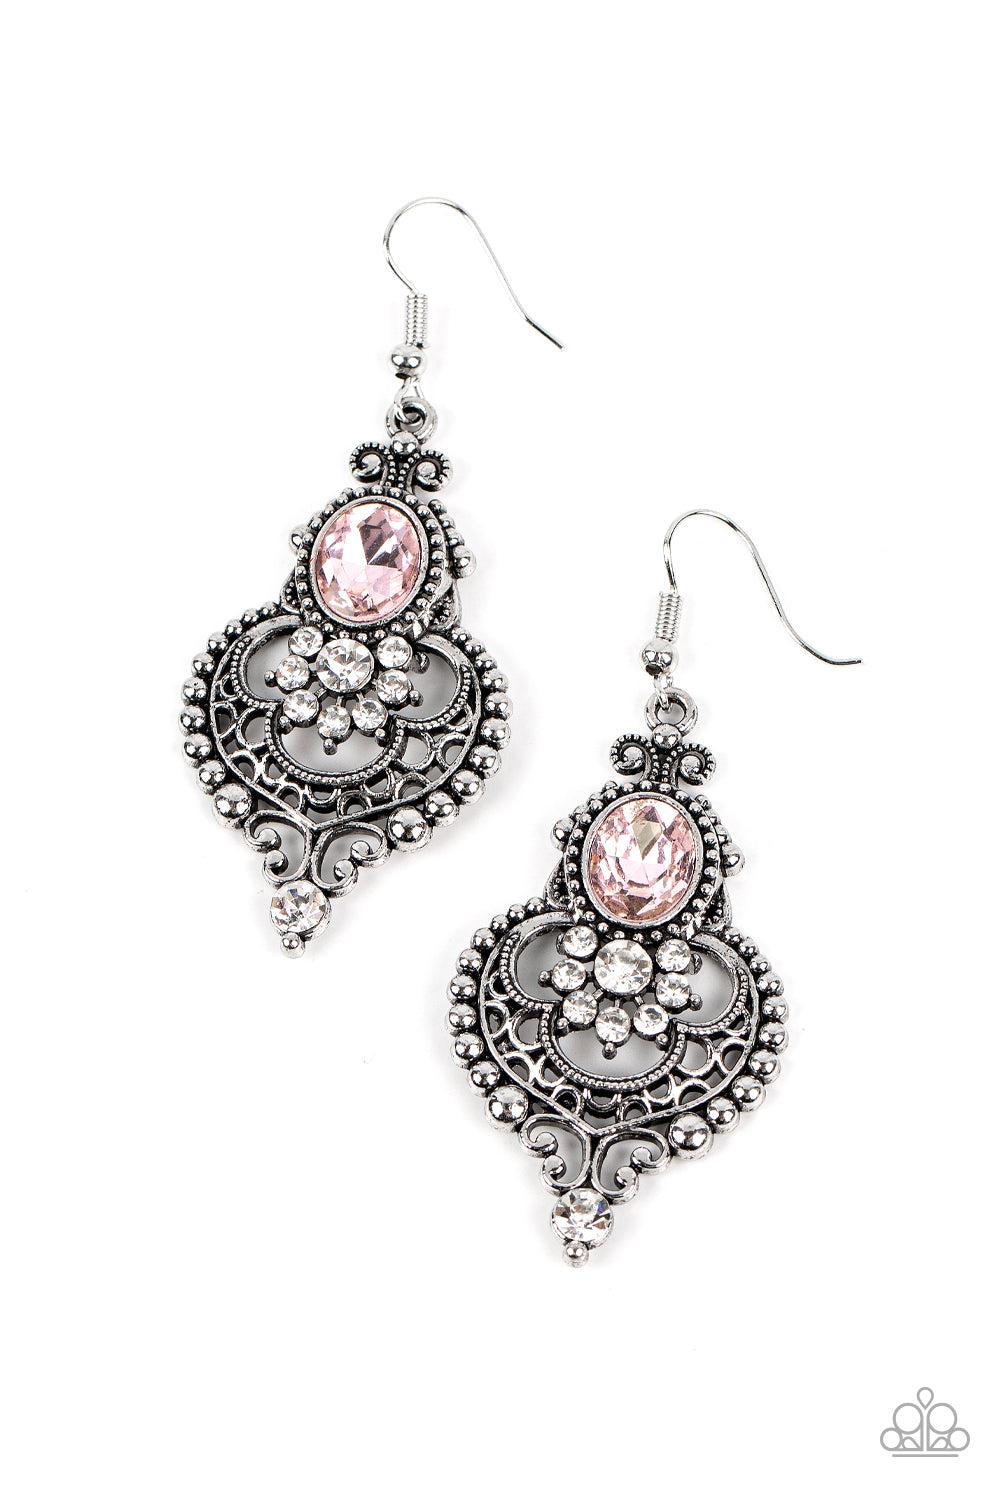 Castle Chateau Pink Rhinestone Earrings - Paparazzi Accessories- lightbox - CarasShop.com - $5 Jewelry by Cara Jewels